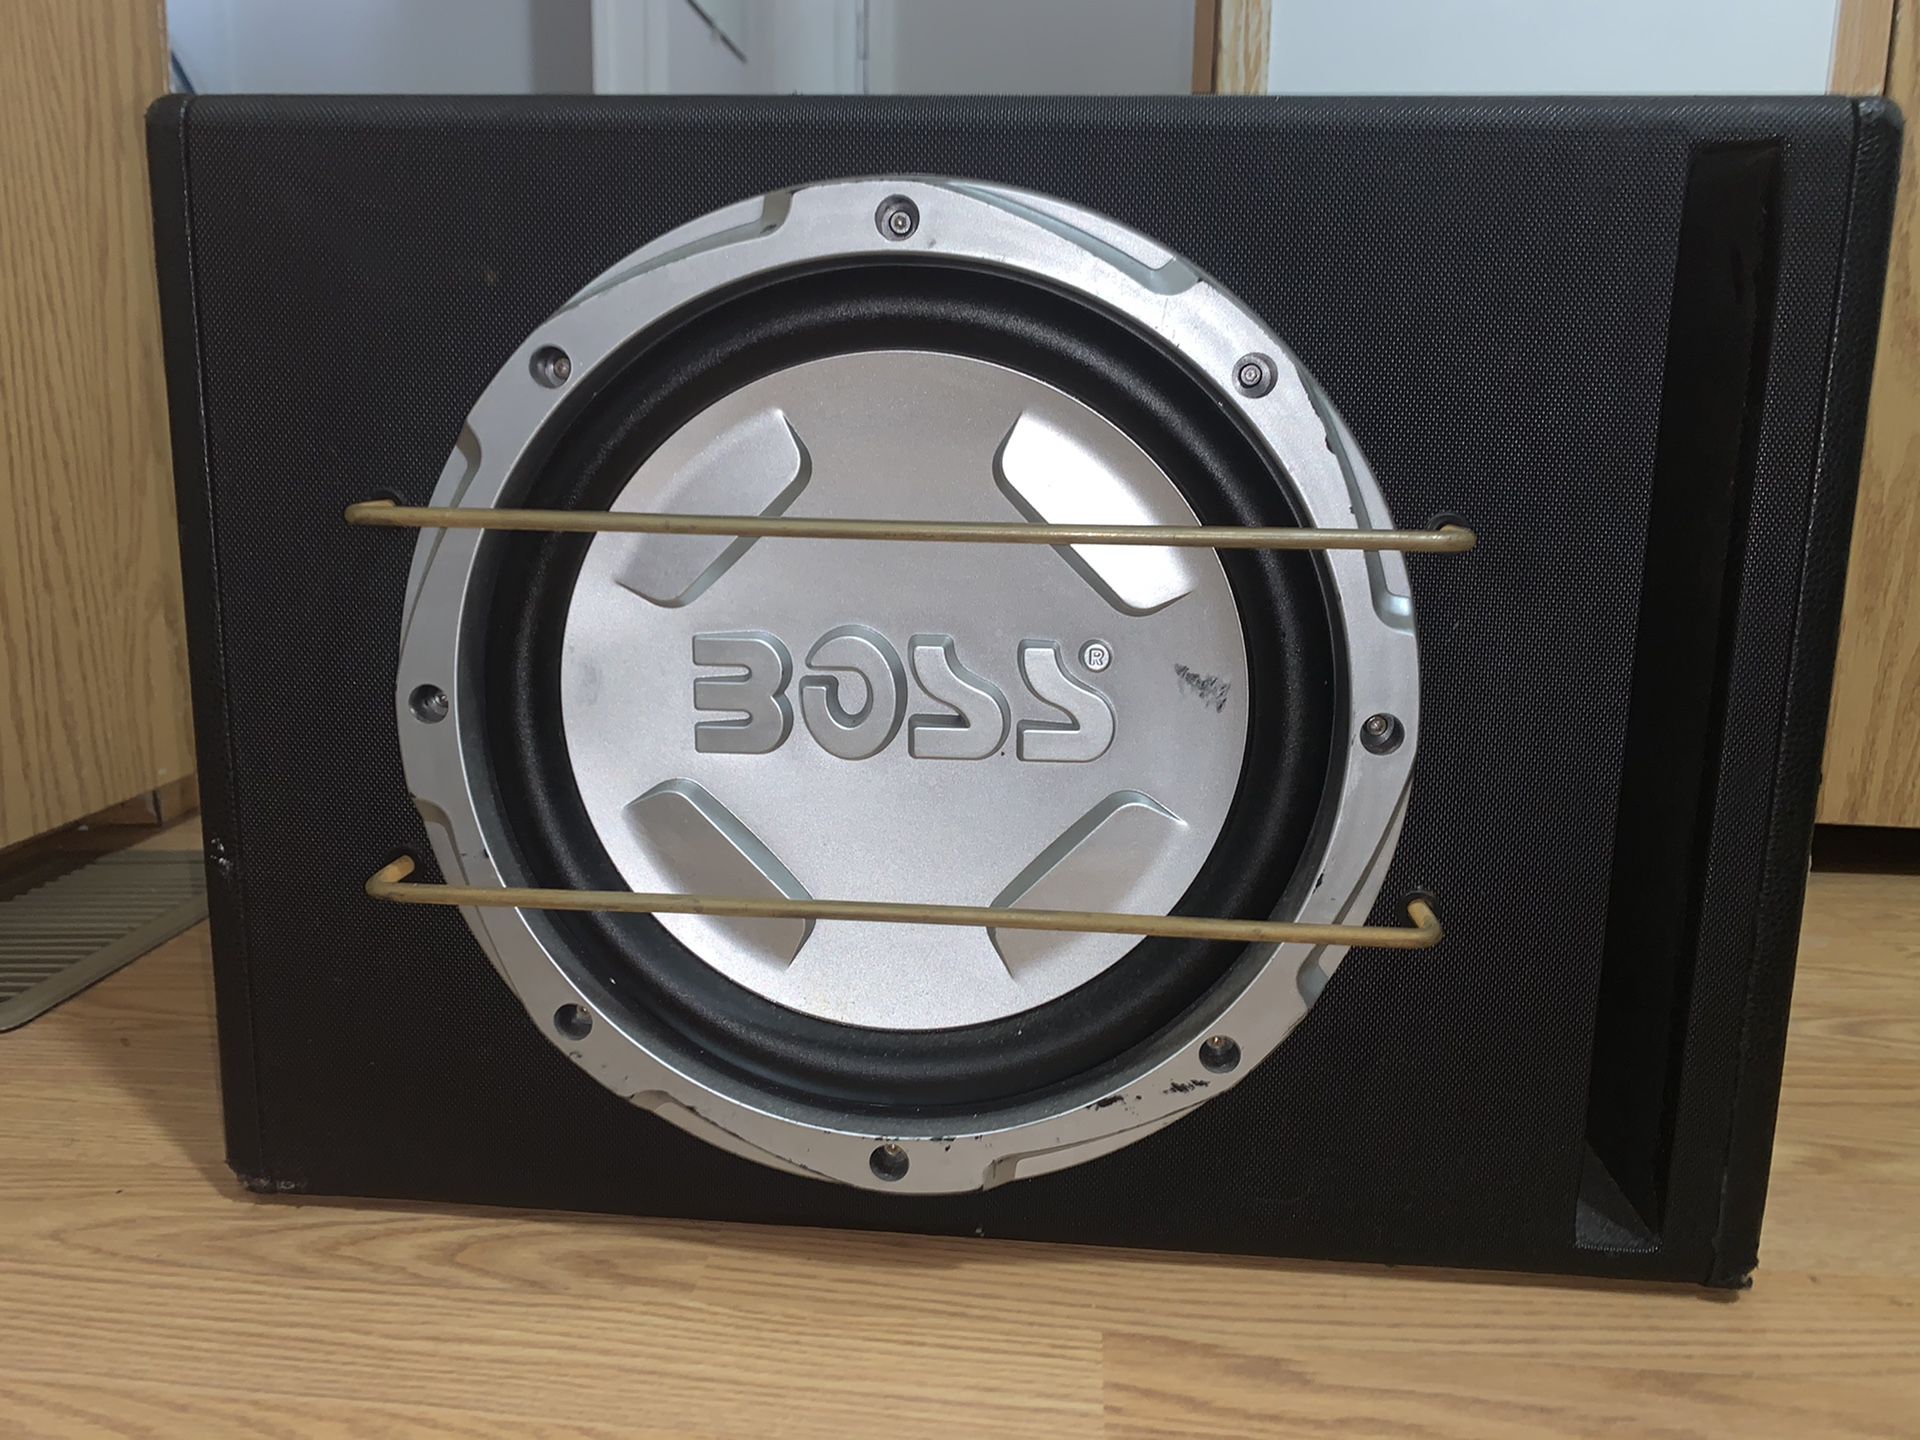 Boss 10” sub with 3000w amp